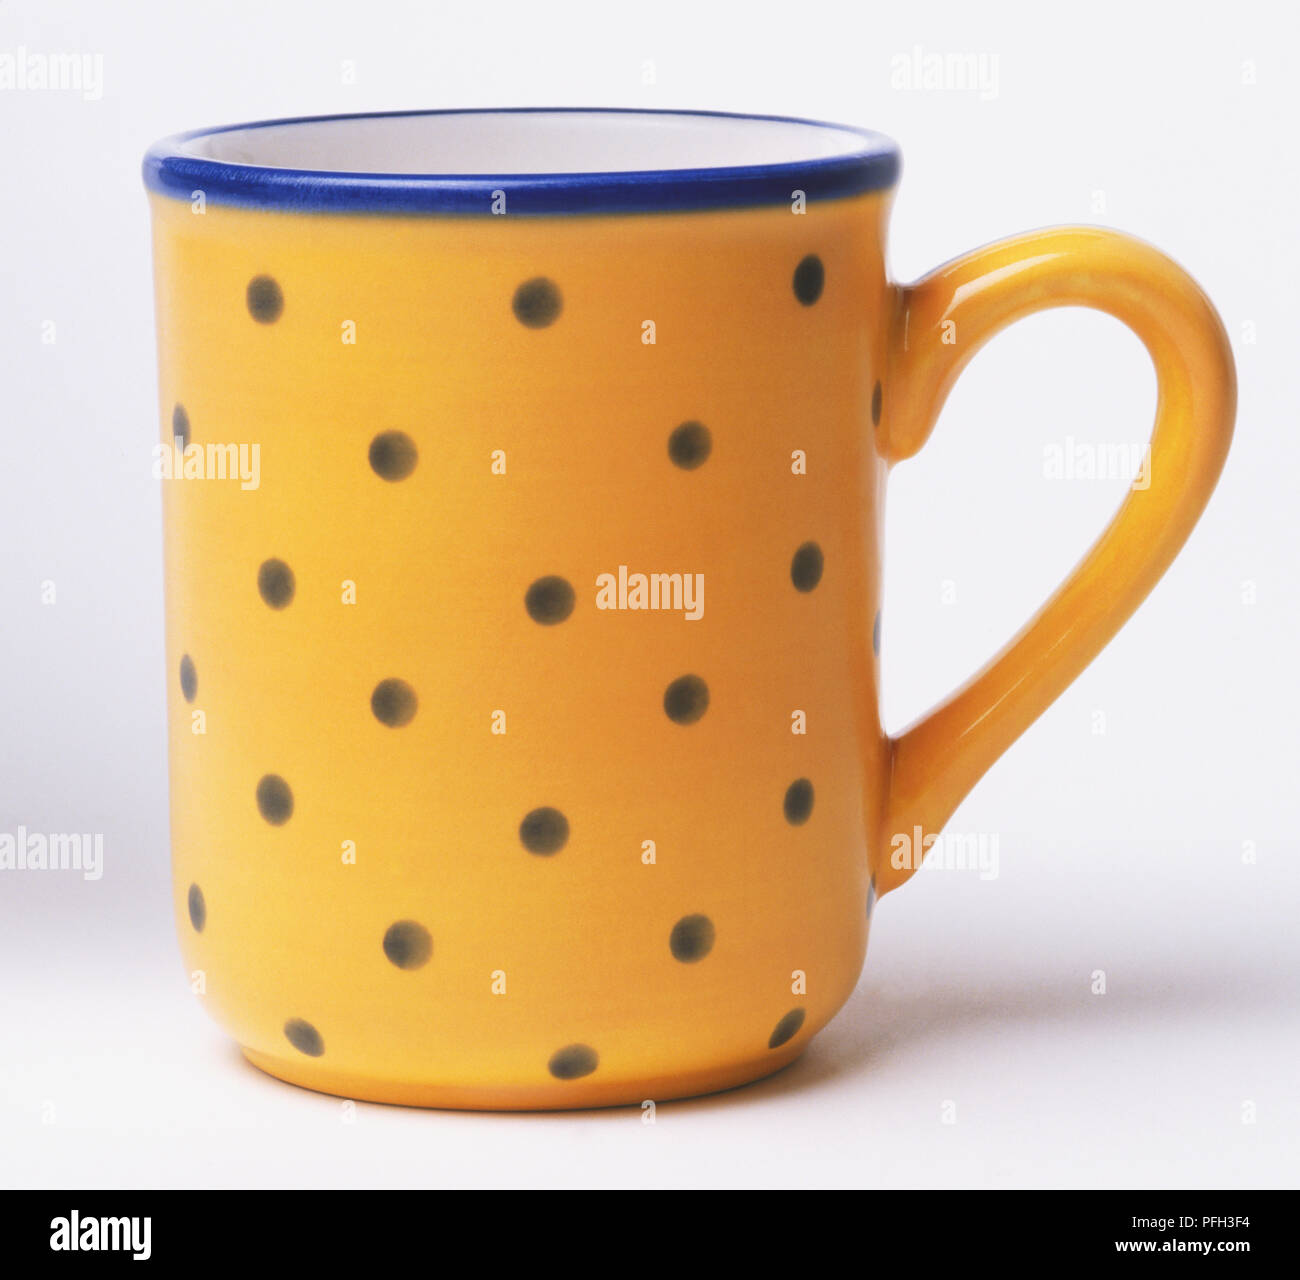 Yellow mug with a pattern of blue dots, front view Stock Photo